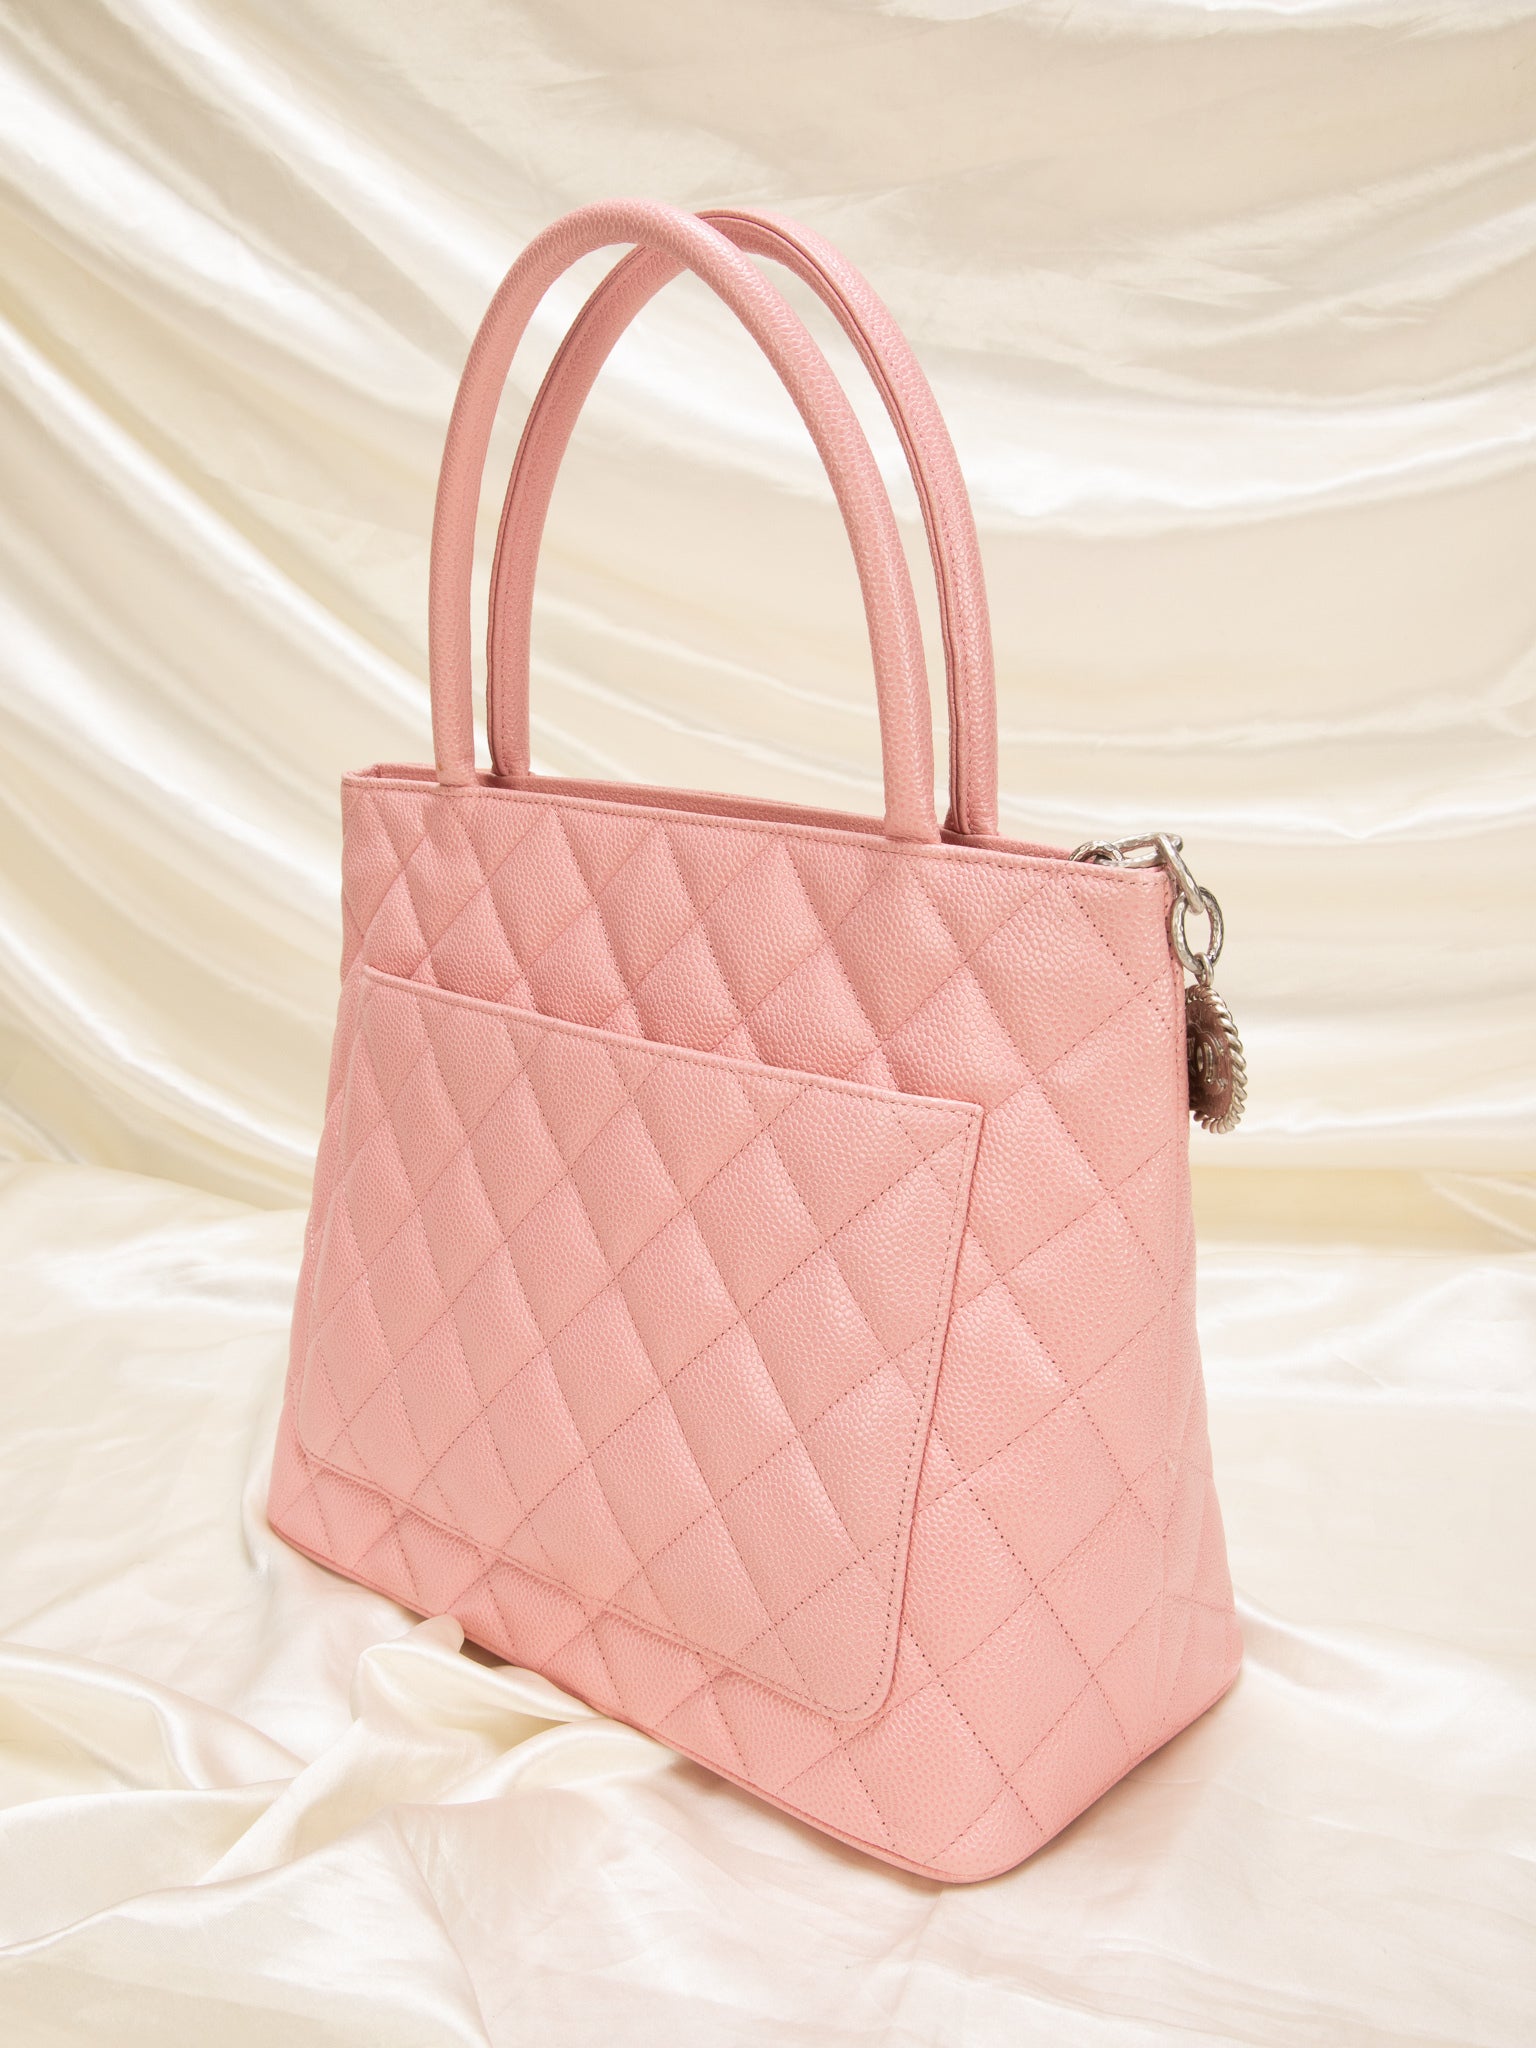 Chanel Pink Caviar Medallion Tote Bag AGL2382 – LuxuryPromise